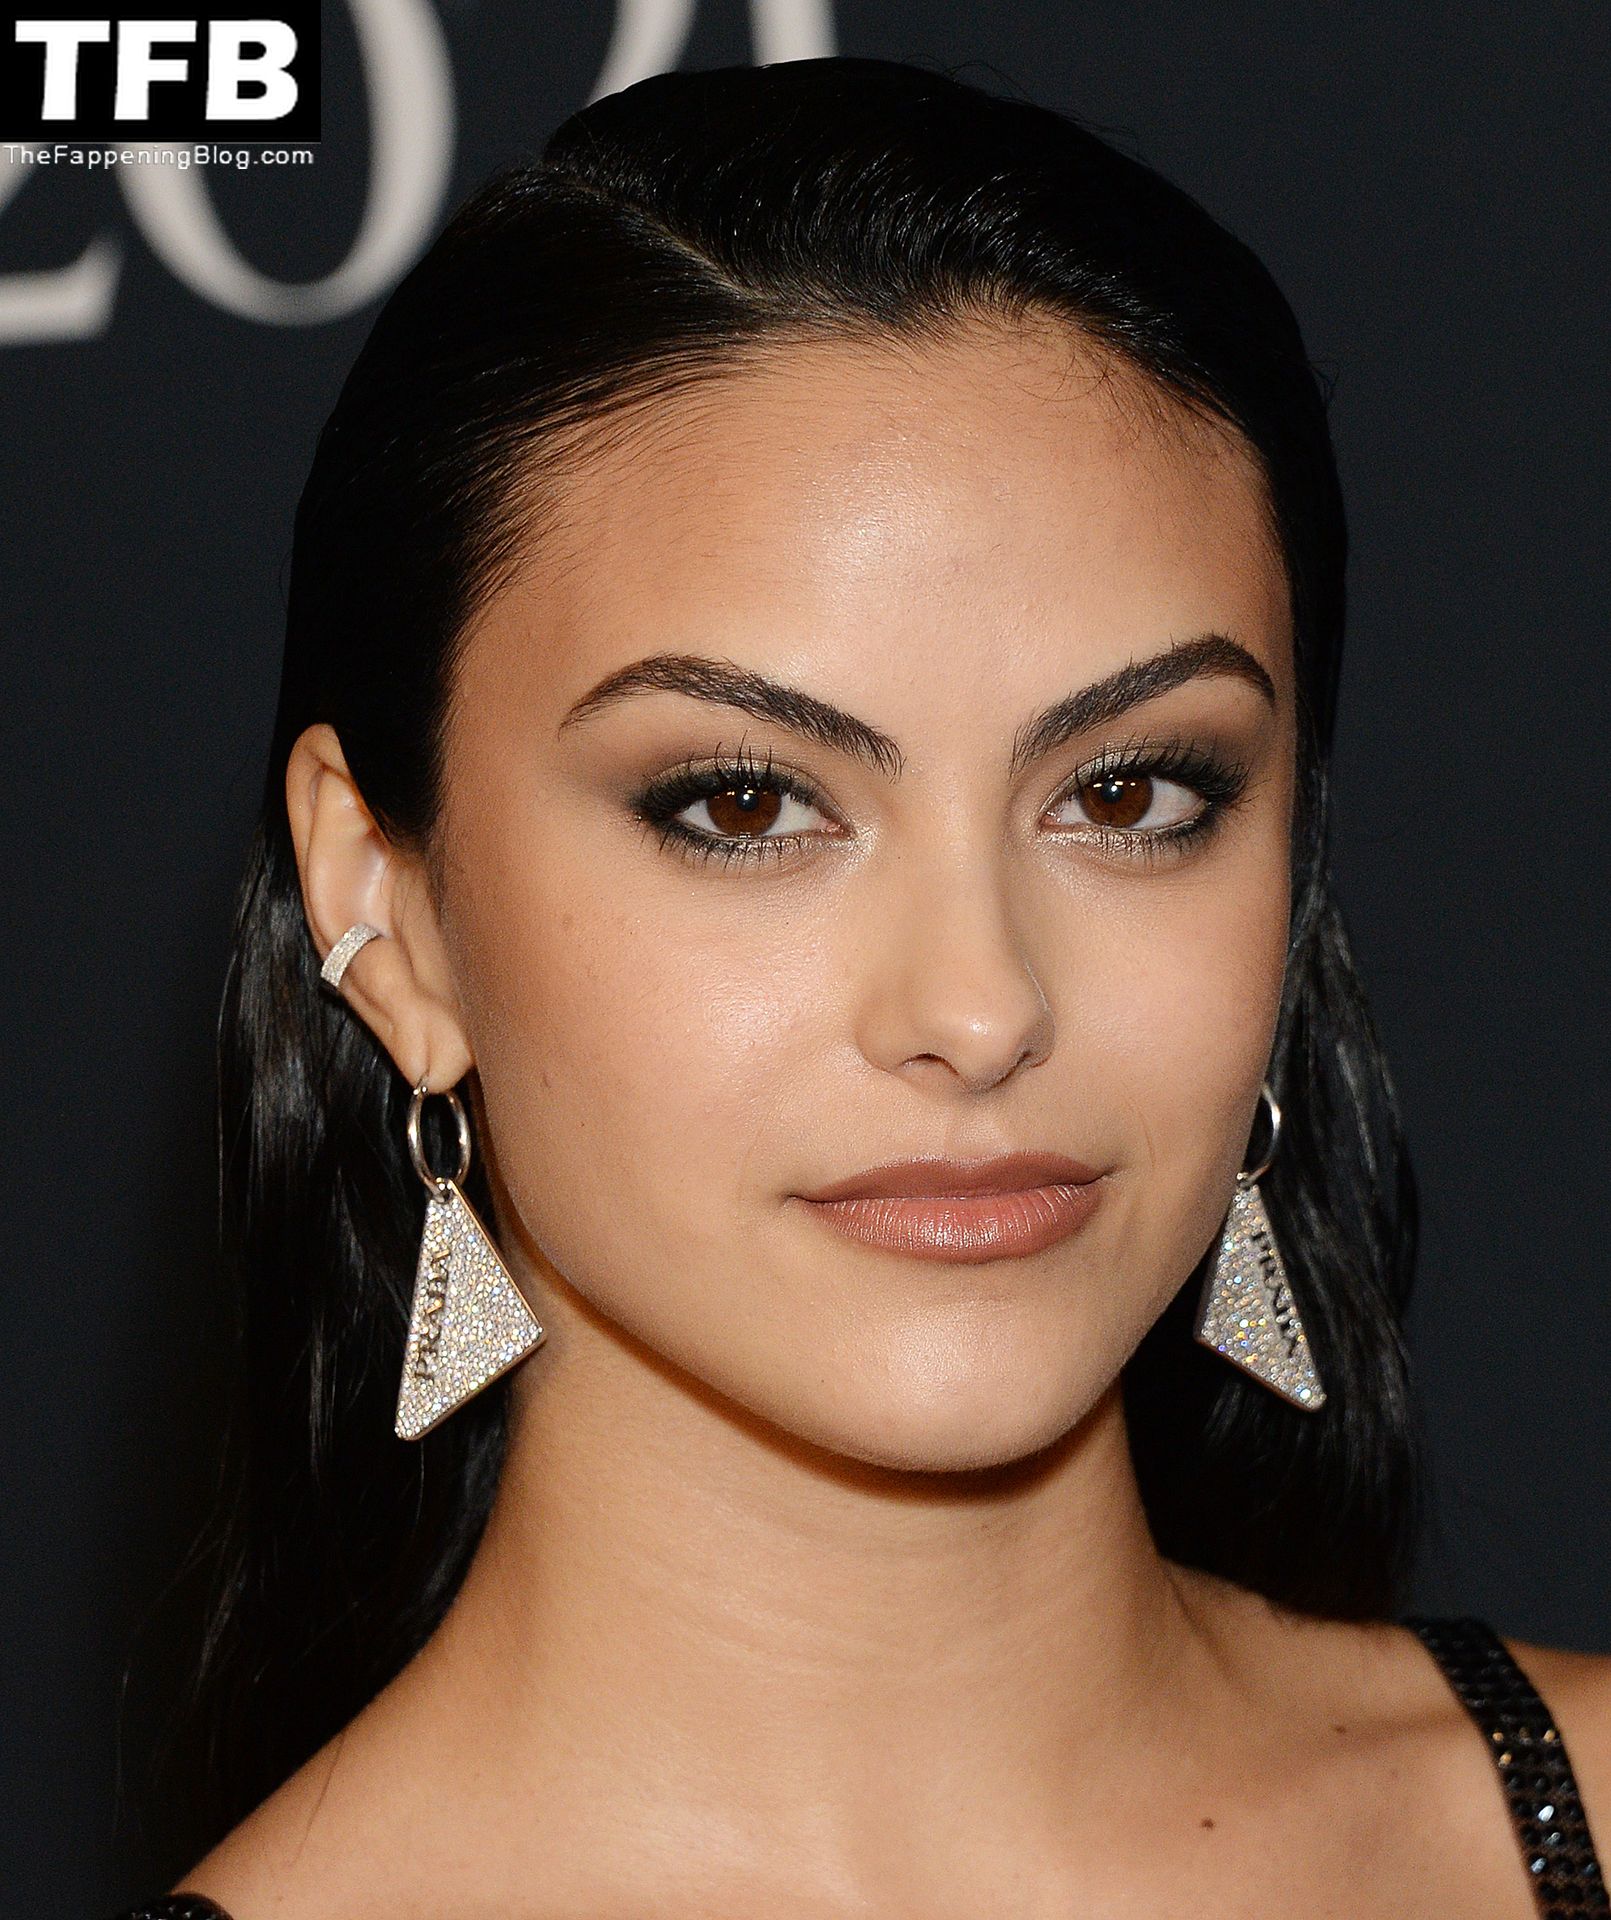 Camila-Mendes-See-Through-Tits-The-Fappening-Blog-52.jpg